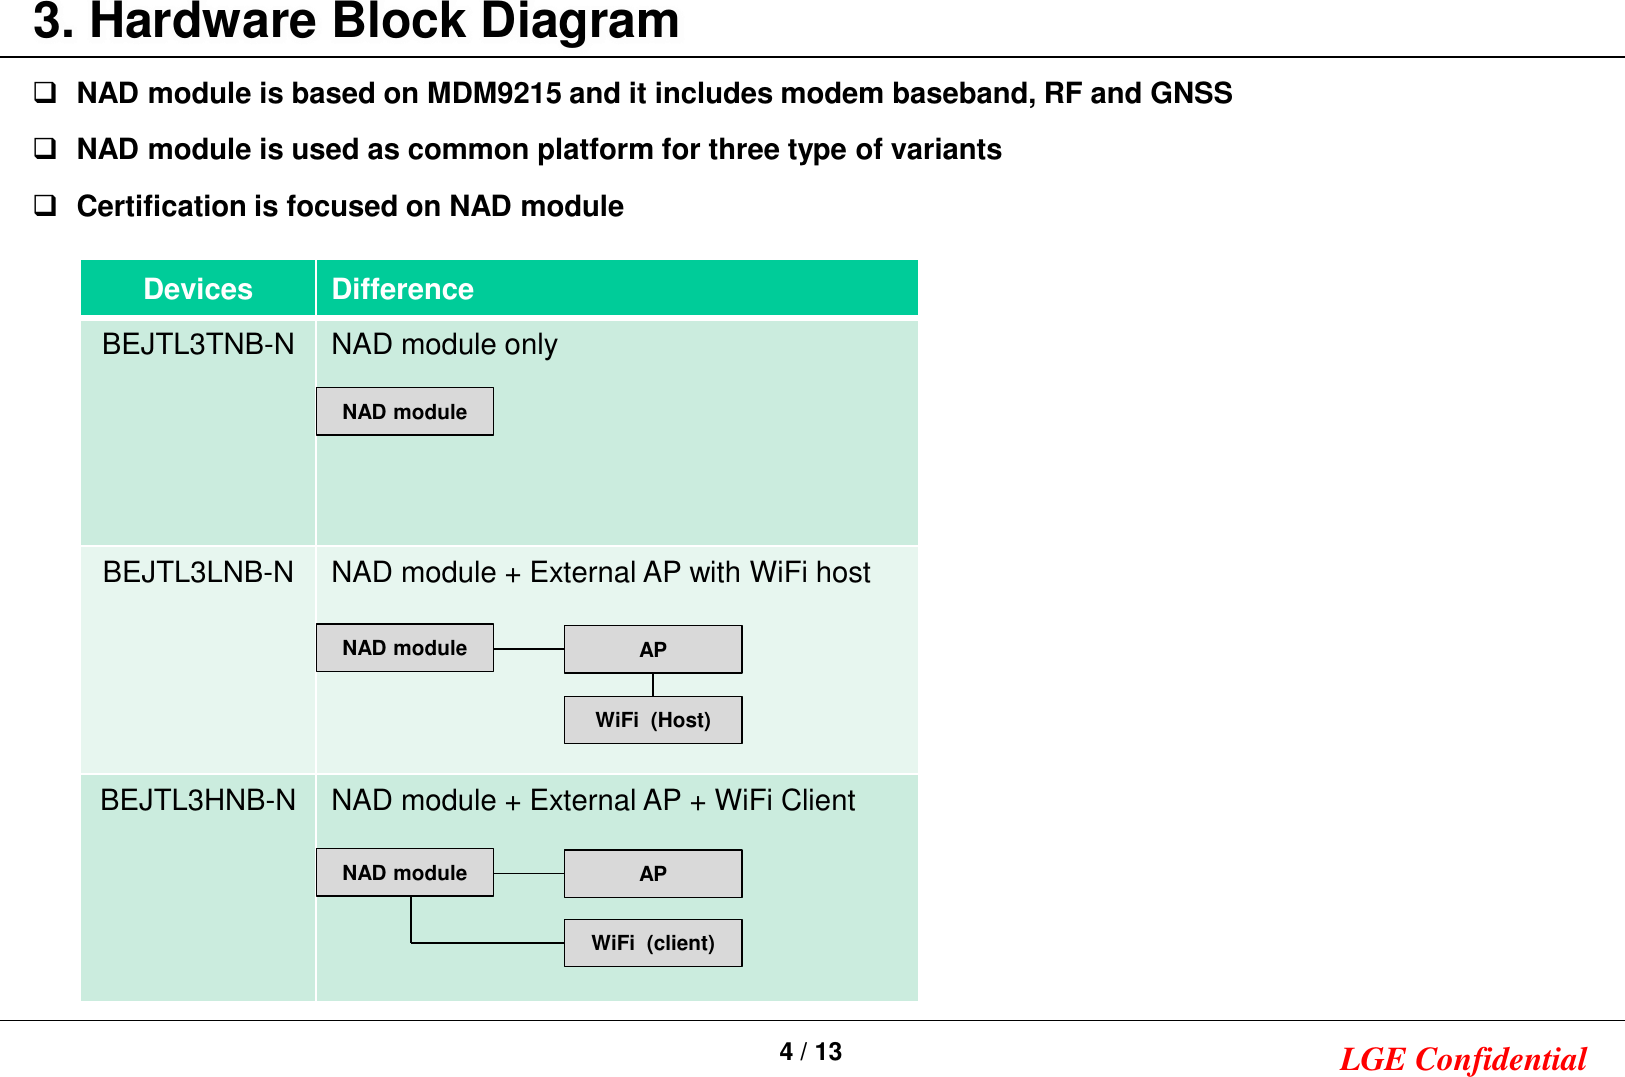 4 / 13 LGE Confidential3. Hardware Block DiagramNAD module is based on MDM9215 and it includes modem baseband, RF and GNSSNAD module is used as common platform for three type of variantsCertification is focused on NAD moduleDevicesDifferenceBEJTL3TNB-NNAD module onlyBEJTL3LNB-NNAD module + External APwith WiFi hostBEJTL3HNB-NNAD module + External AP+ WiFi ClientAPWiFi (Host)APWiFi (client)NAD moduleNAD moduleNAD module